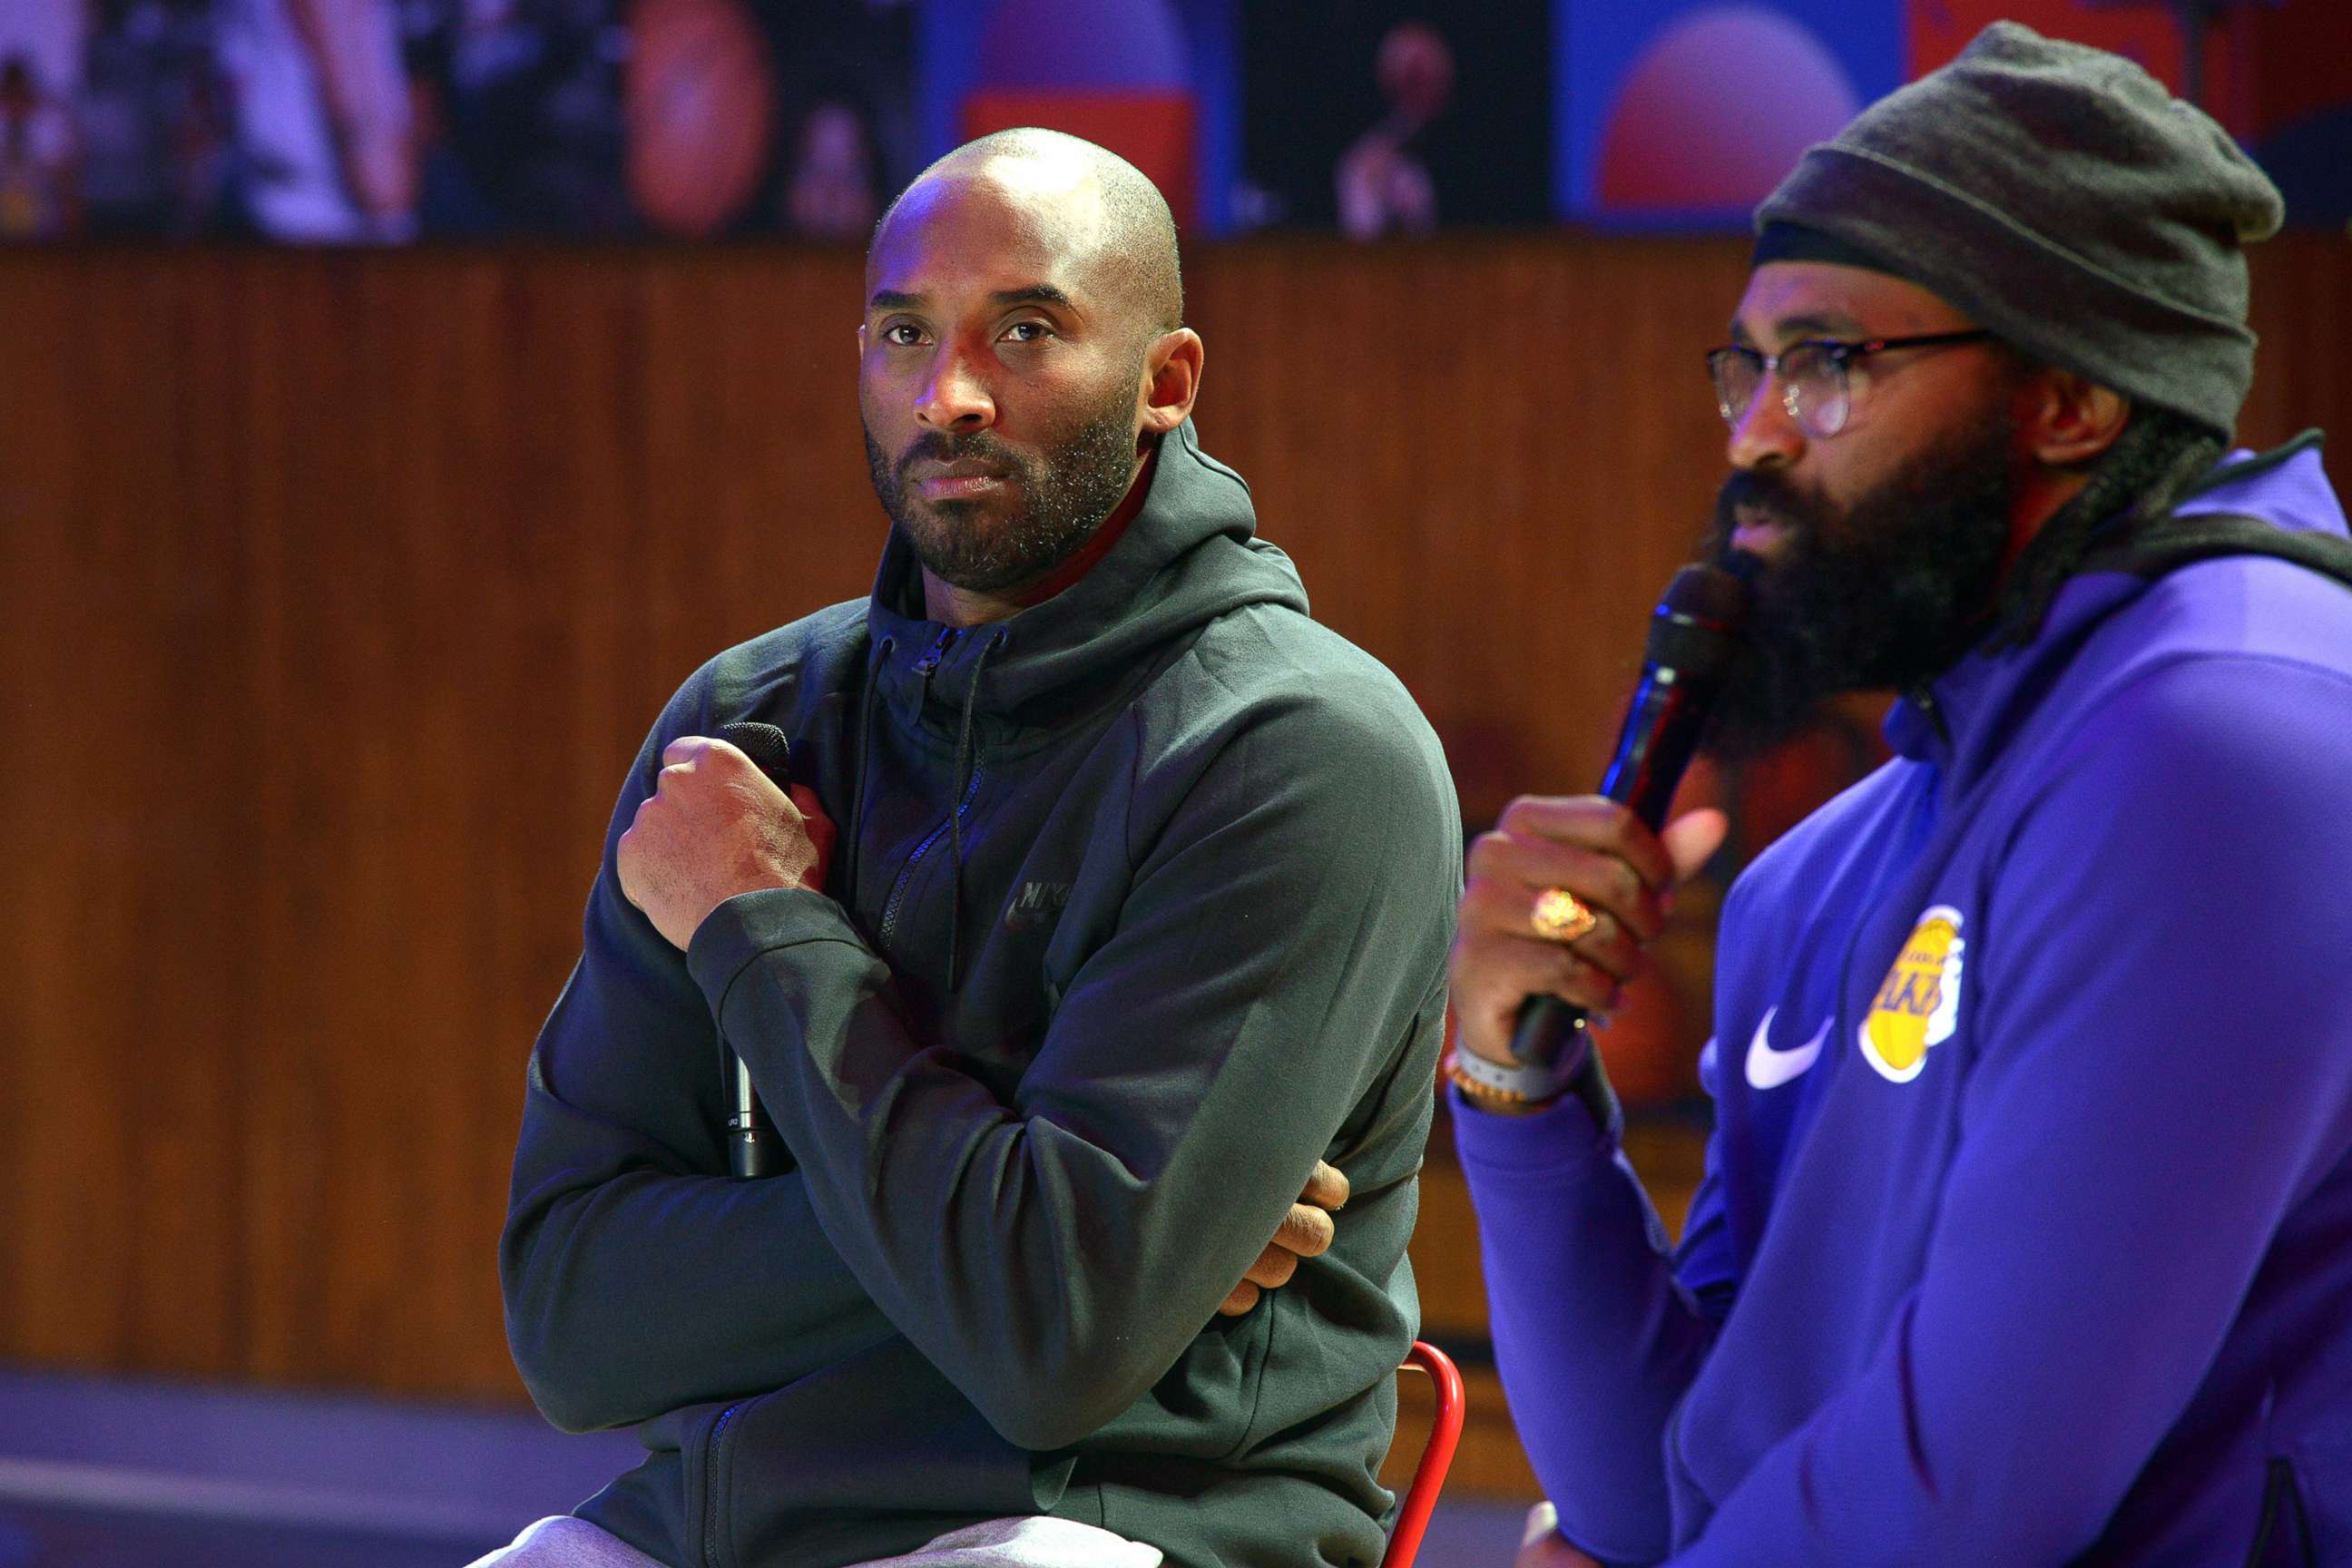 PHOTO: Kobe Bryant gives a "Mamba talk" as he reflects on his NBA memories at "Le Quartier" renovated gymnasium dedicated to basketball games and culture, Oct. 21, 2017, in Paris.